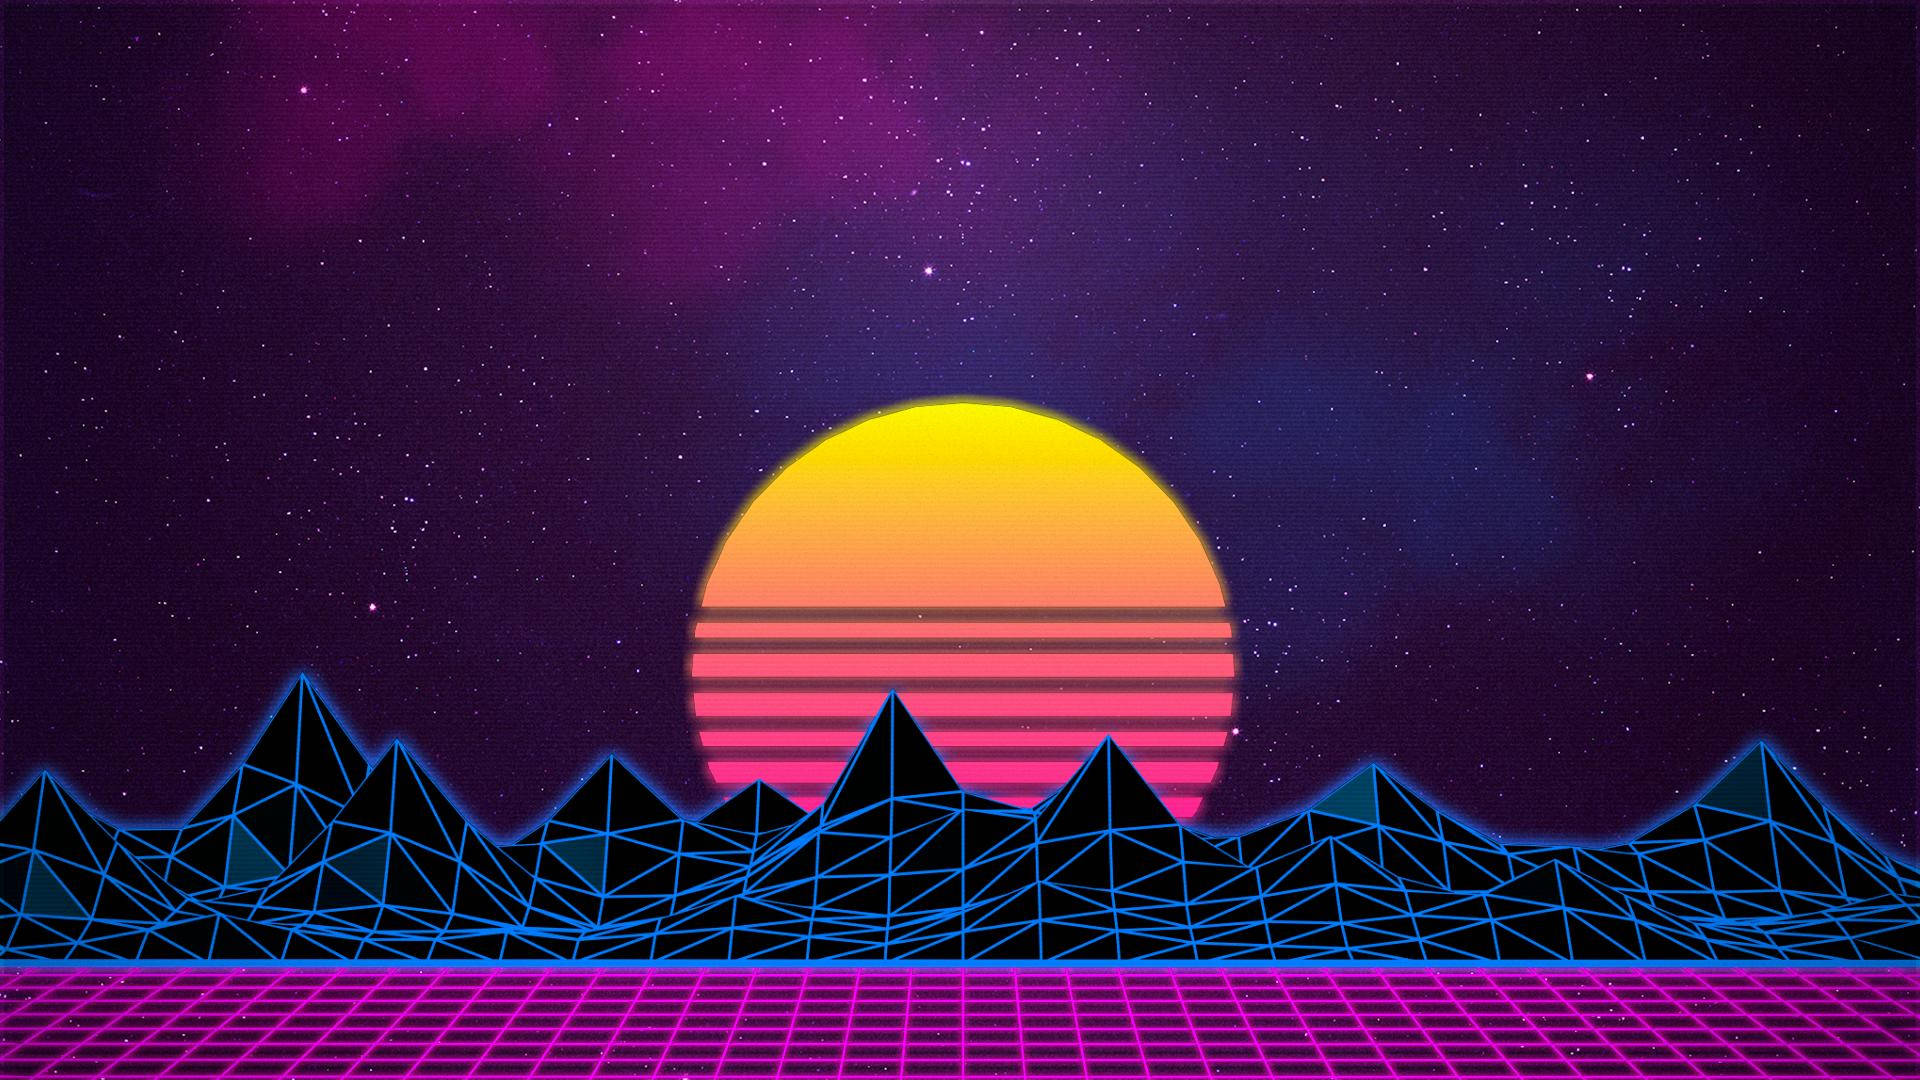 Animated Outrun Collage Wallpaper